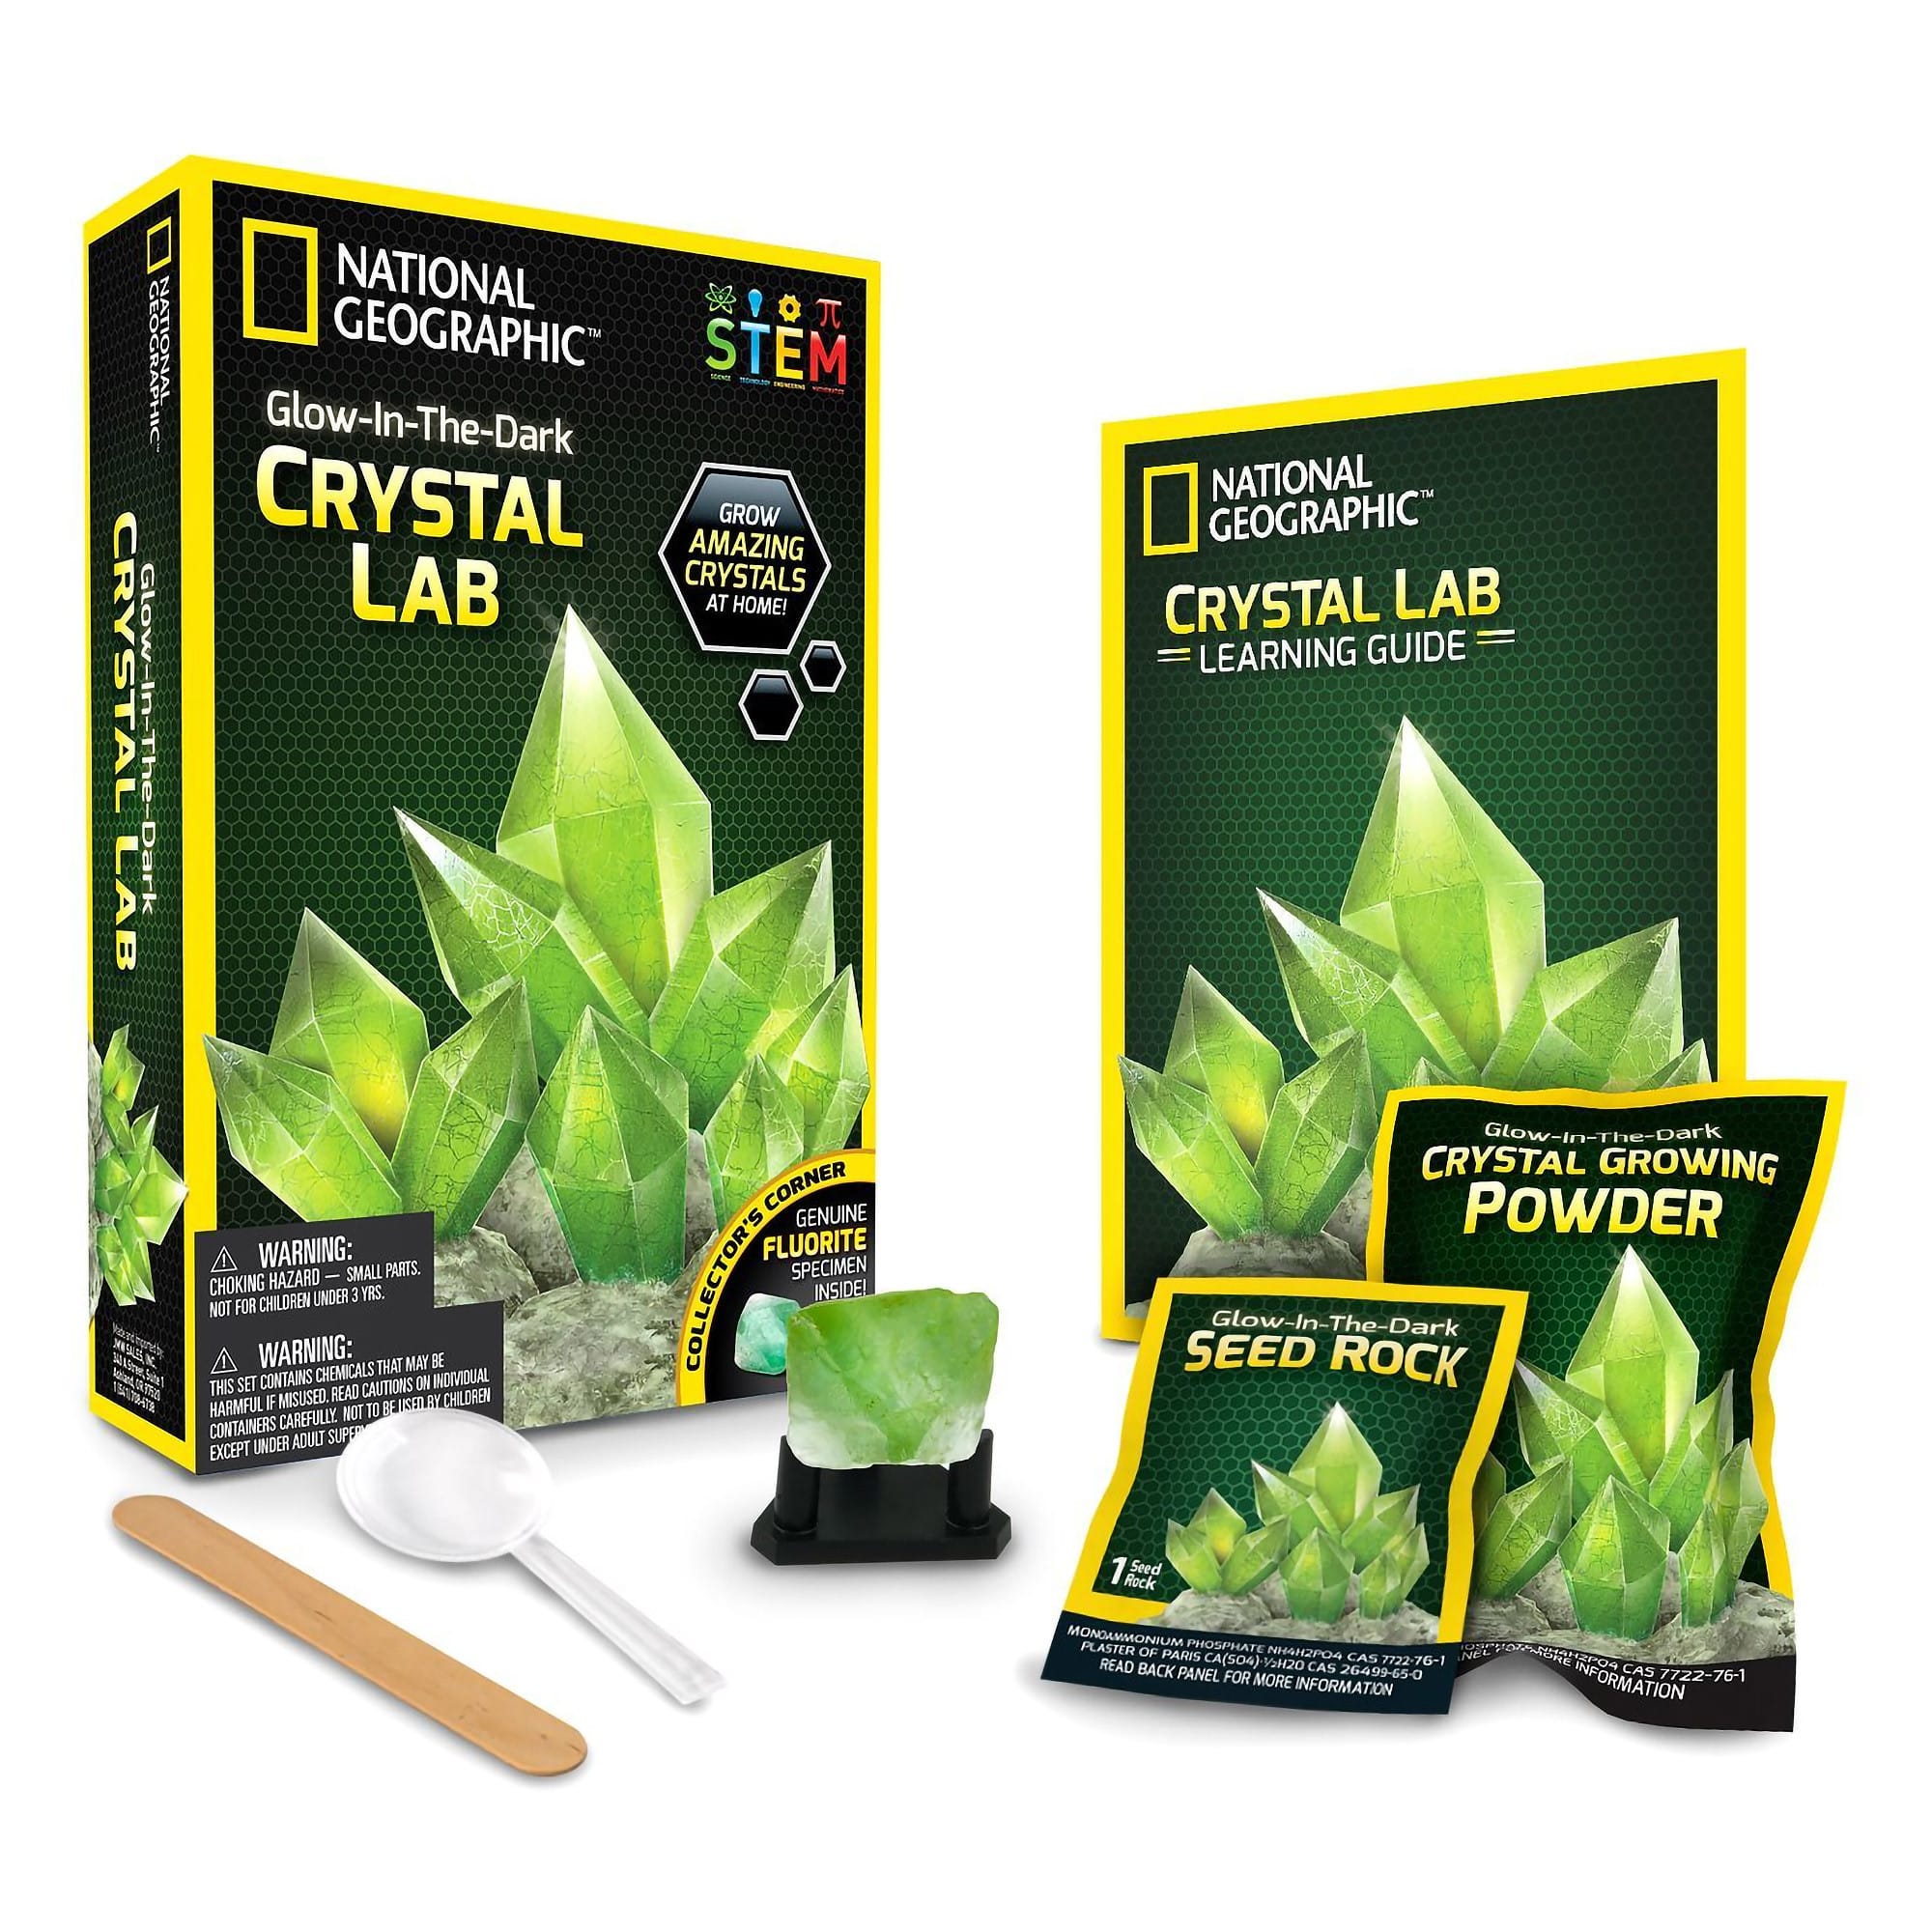 National Geographic - Glow-In-The-Dark Crystal Lab